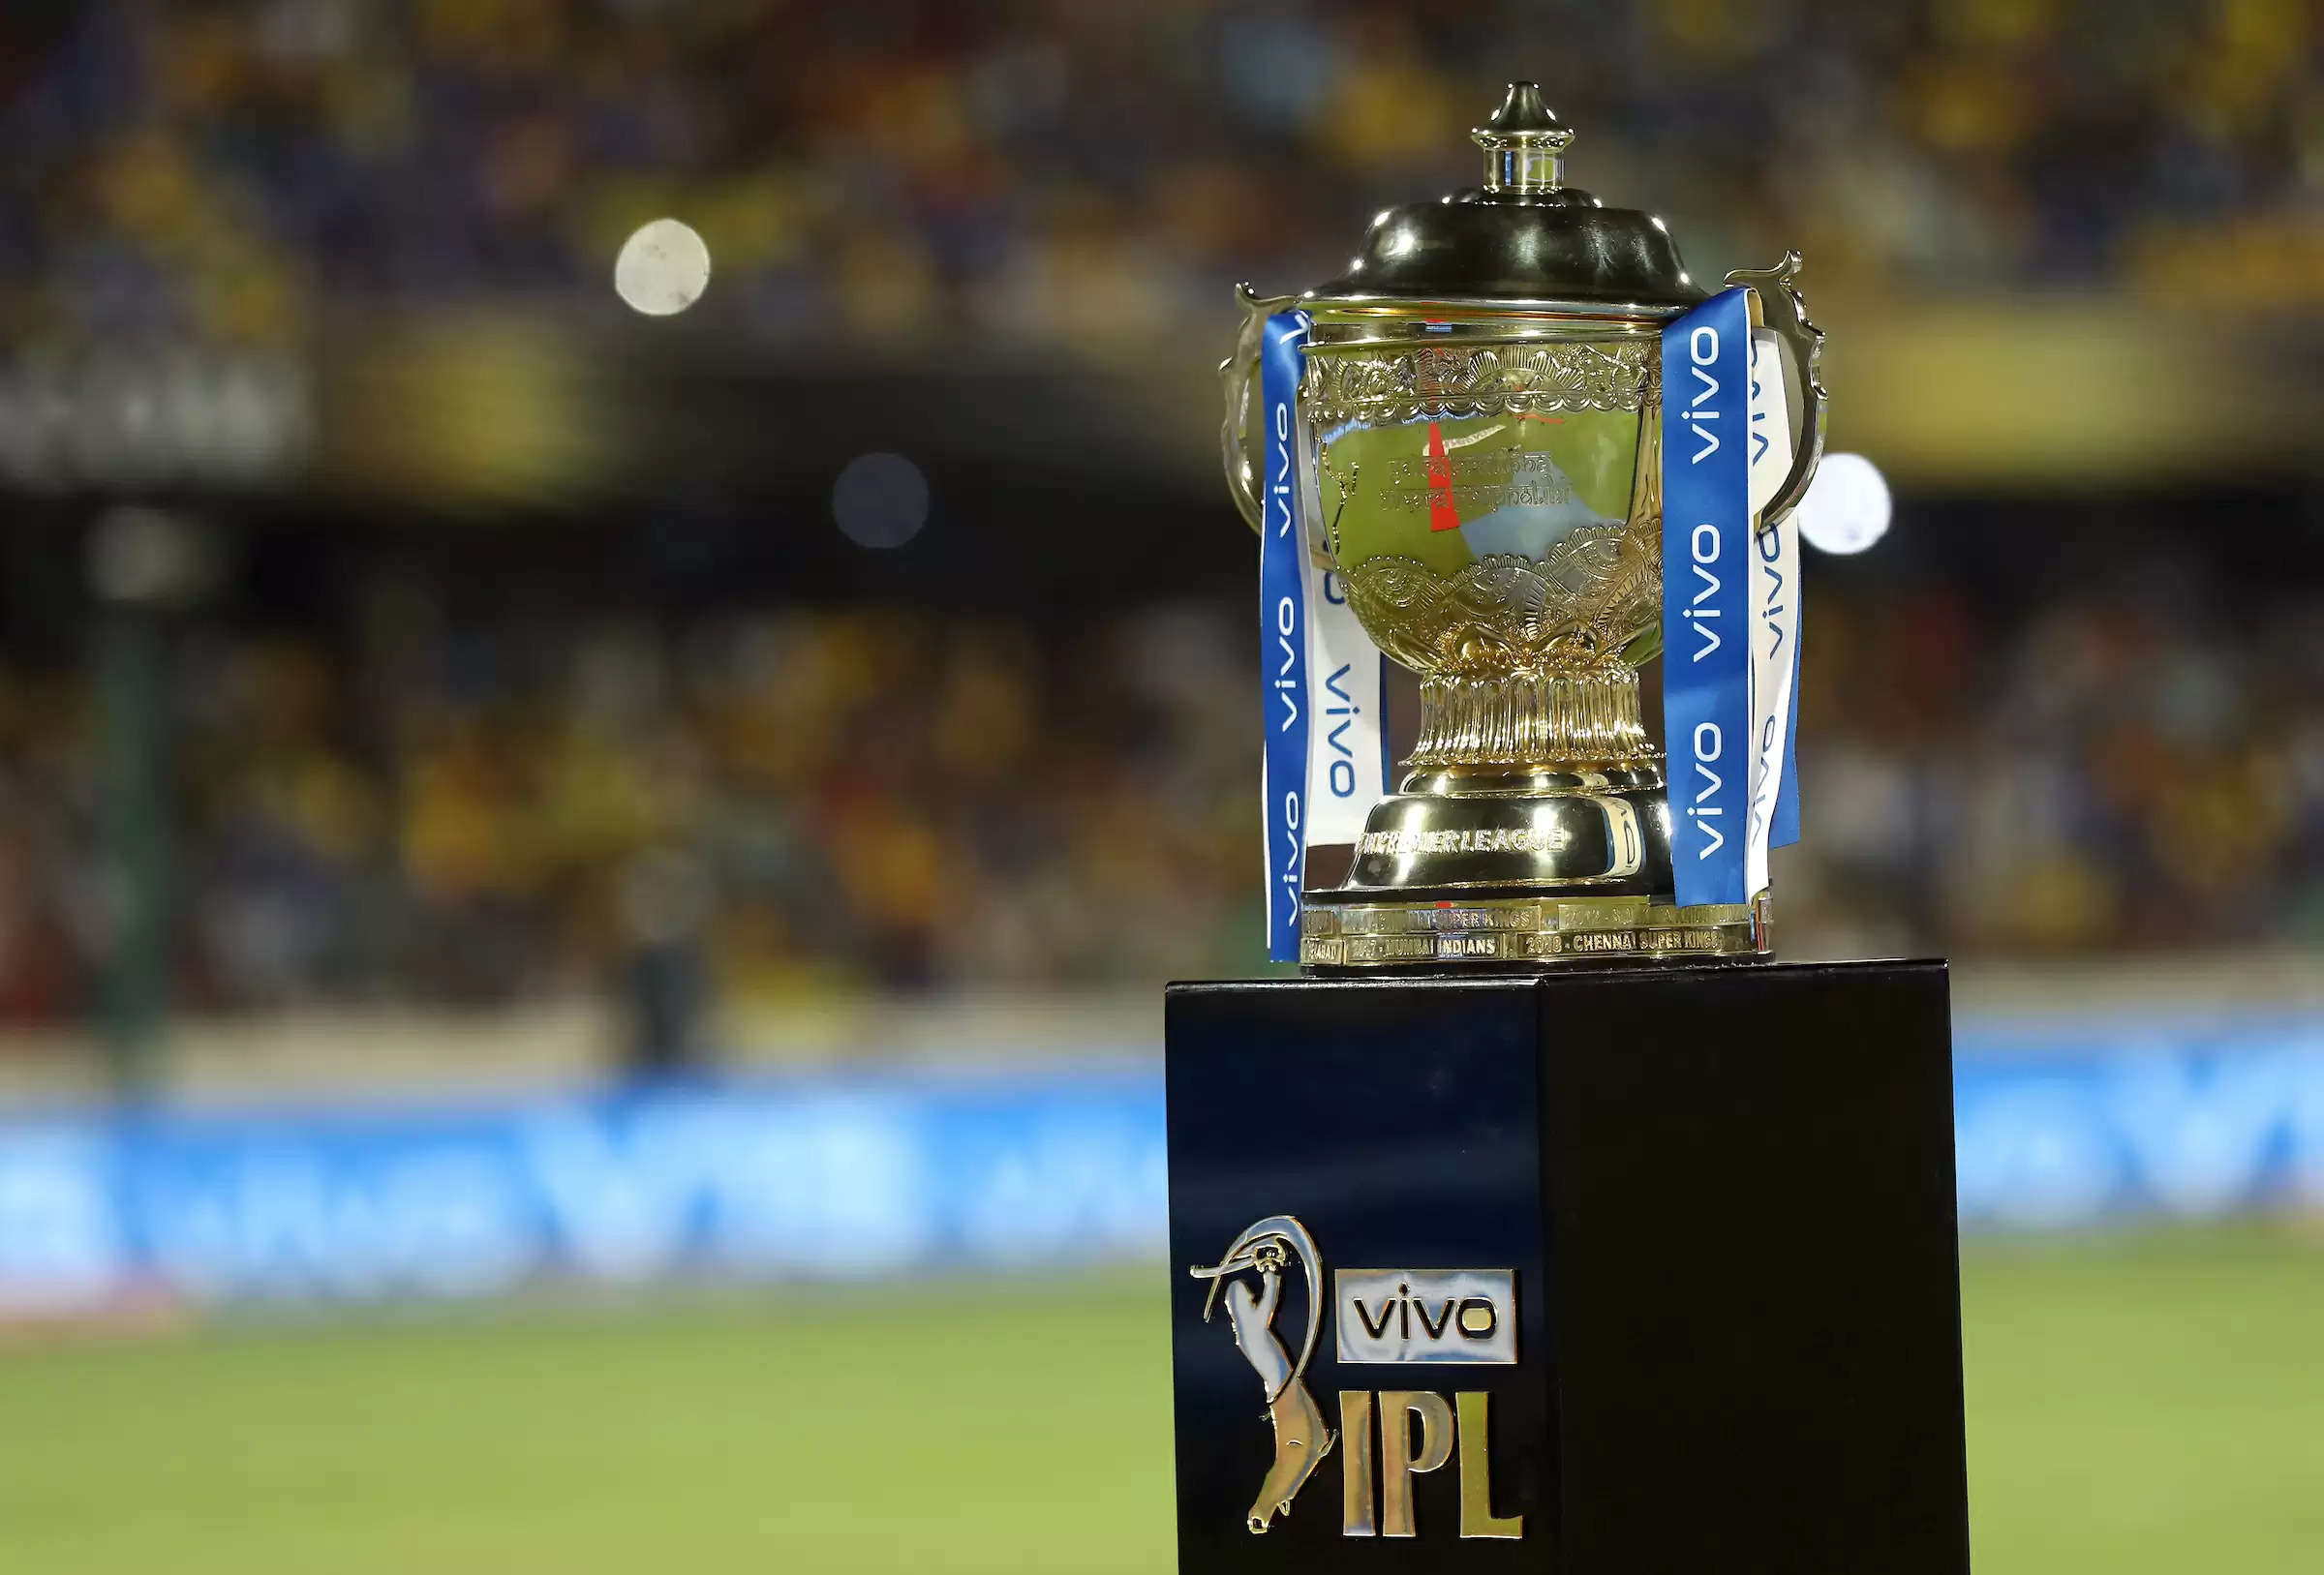 IPL 2022 Groups, Schedule and Format Announced: MI, KKR in Group A; CSK, RCB in Group B